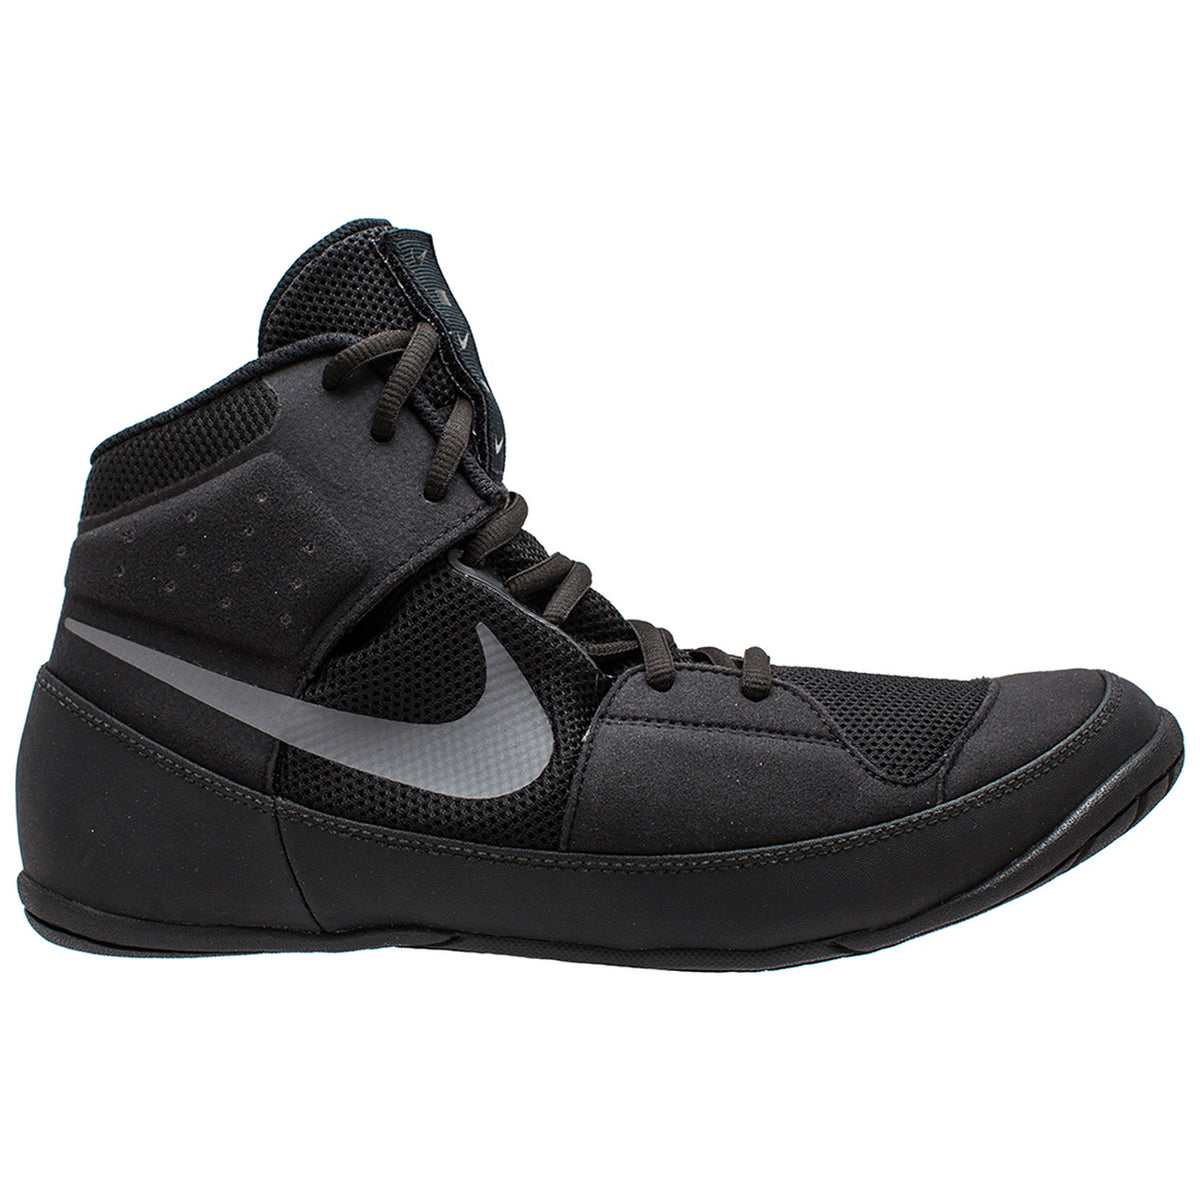 Nike Fury wrestling shoes. The ideal wrestling shoe for beginners and advanced wrestlers. Great quality and traction on the mat. No matter whether in competition or training. With wrestling shoes from Nike you will be at the forefront. Here in the color black.